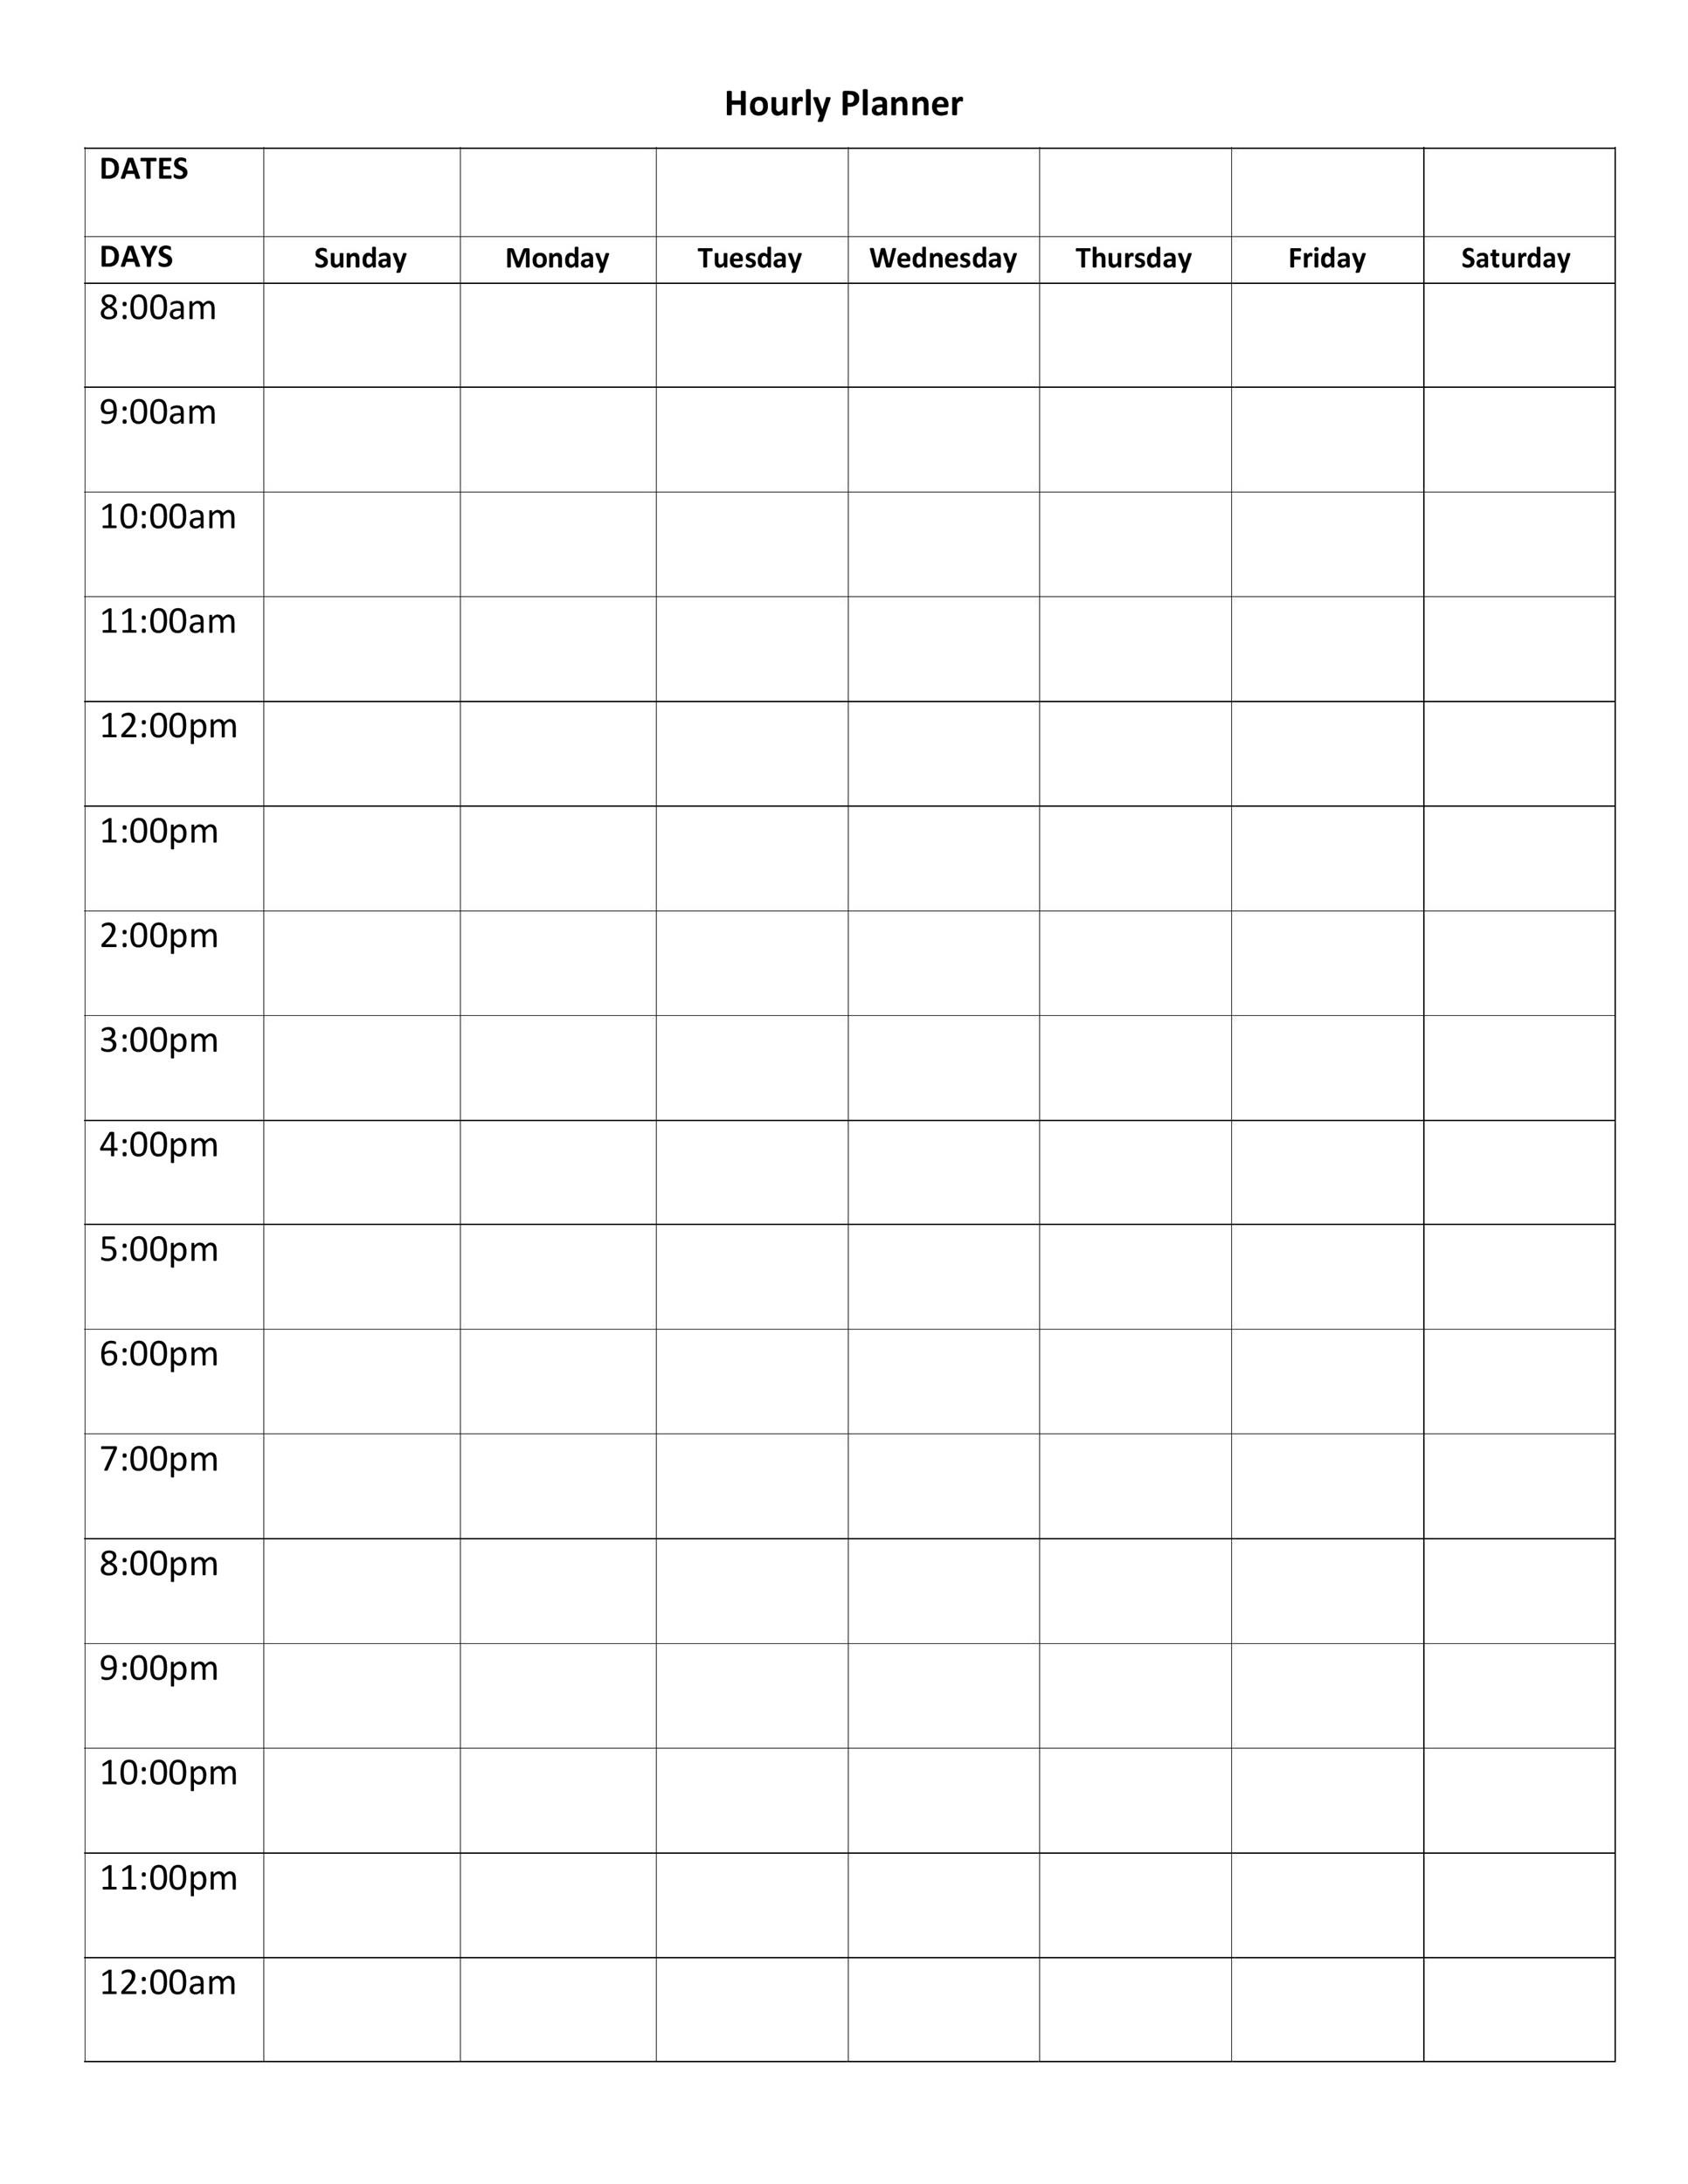 Free hourly schedule template 15